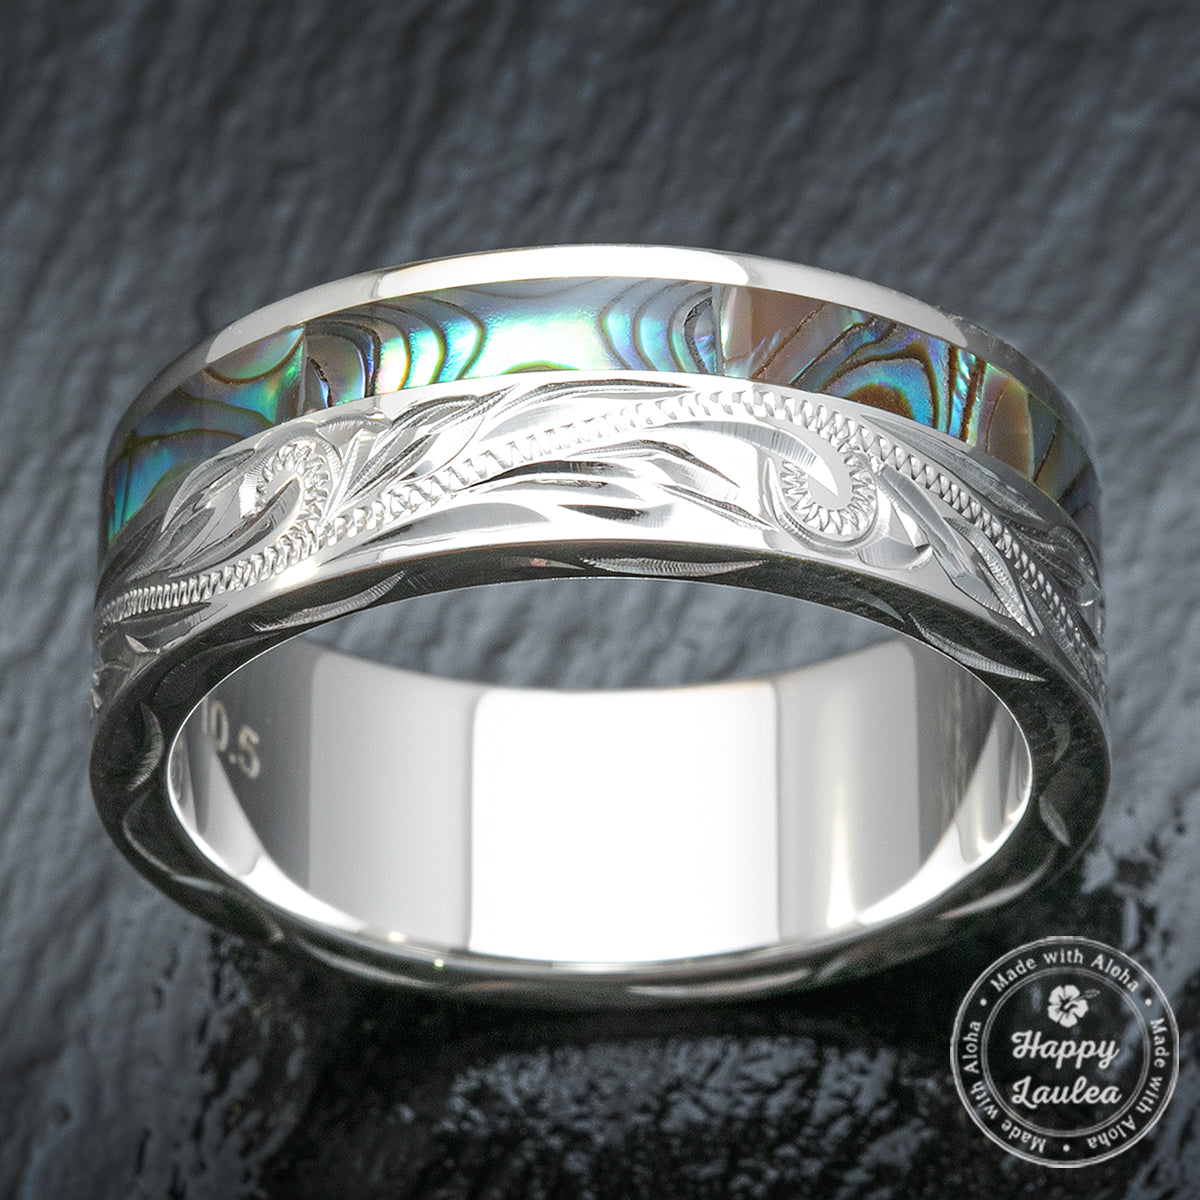 Sterling Silver Hand Engraved Ring with Offset Abalone Shell Inlay - 8mm, Flat Shape, Standard Fitment